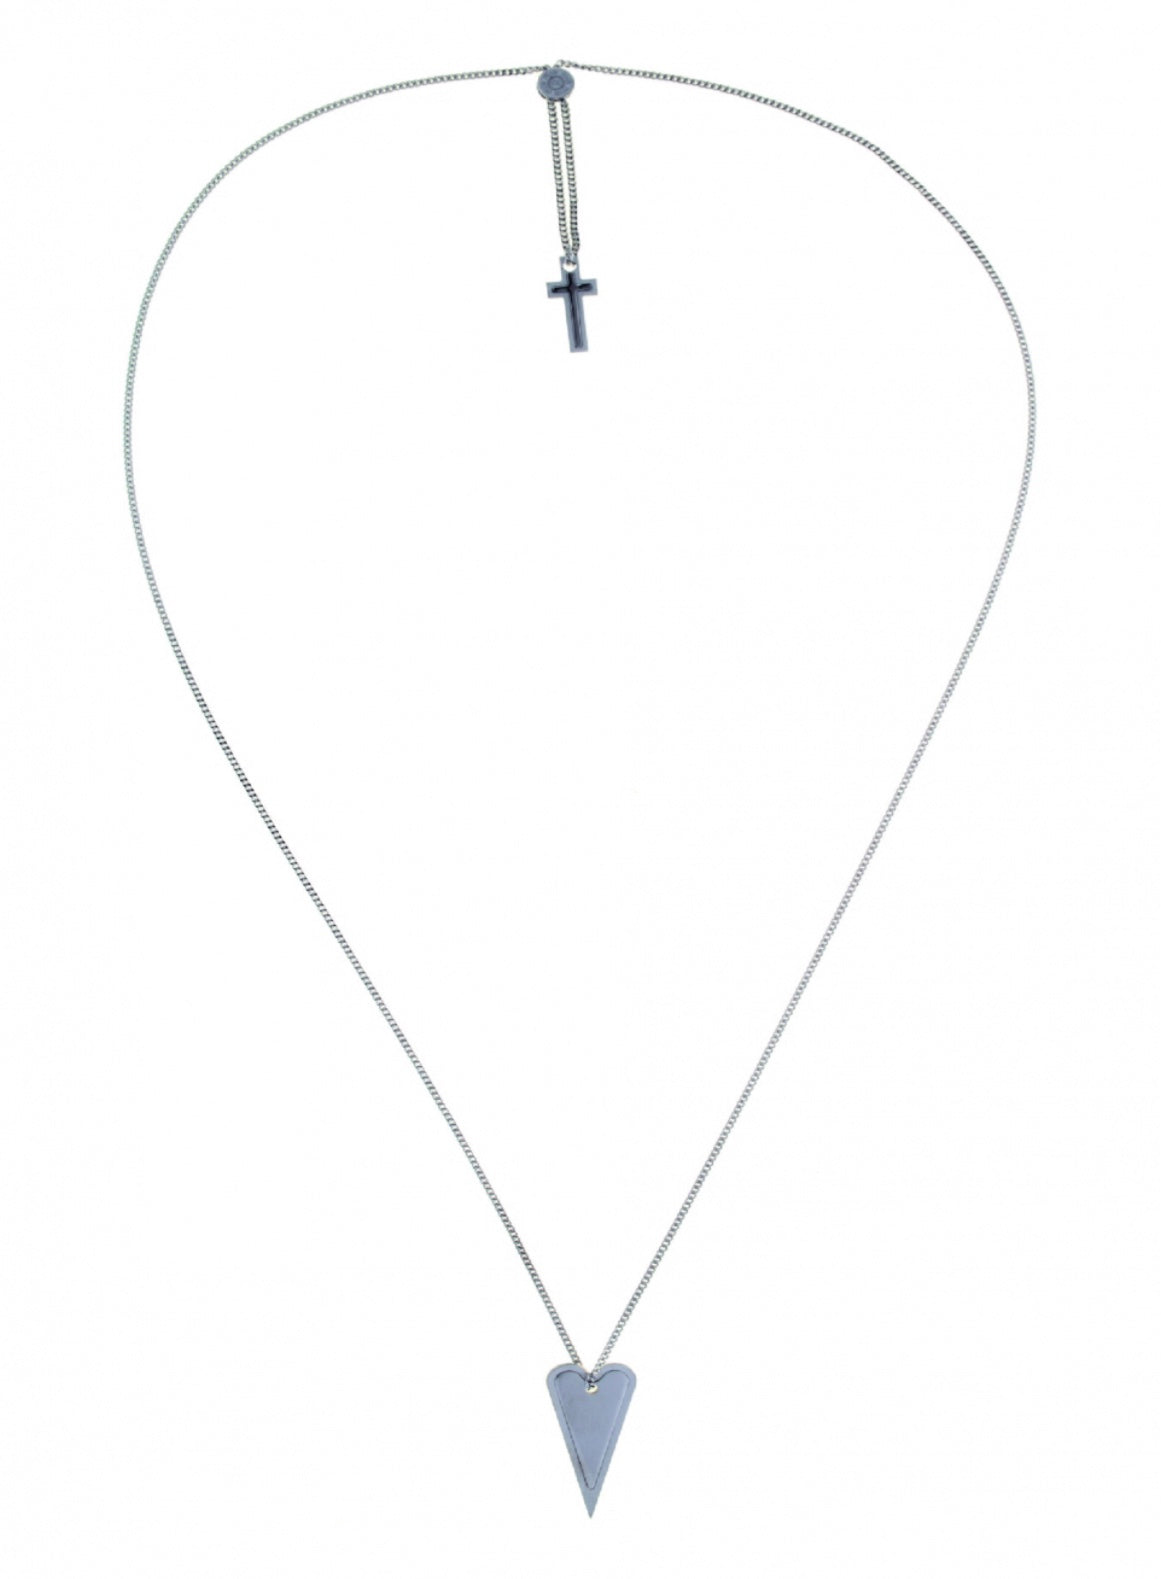 MY HEART E CROSS NECKLACE | PNG68 Designed by Franco Pianegonda | Luby 